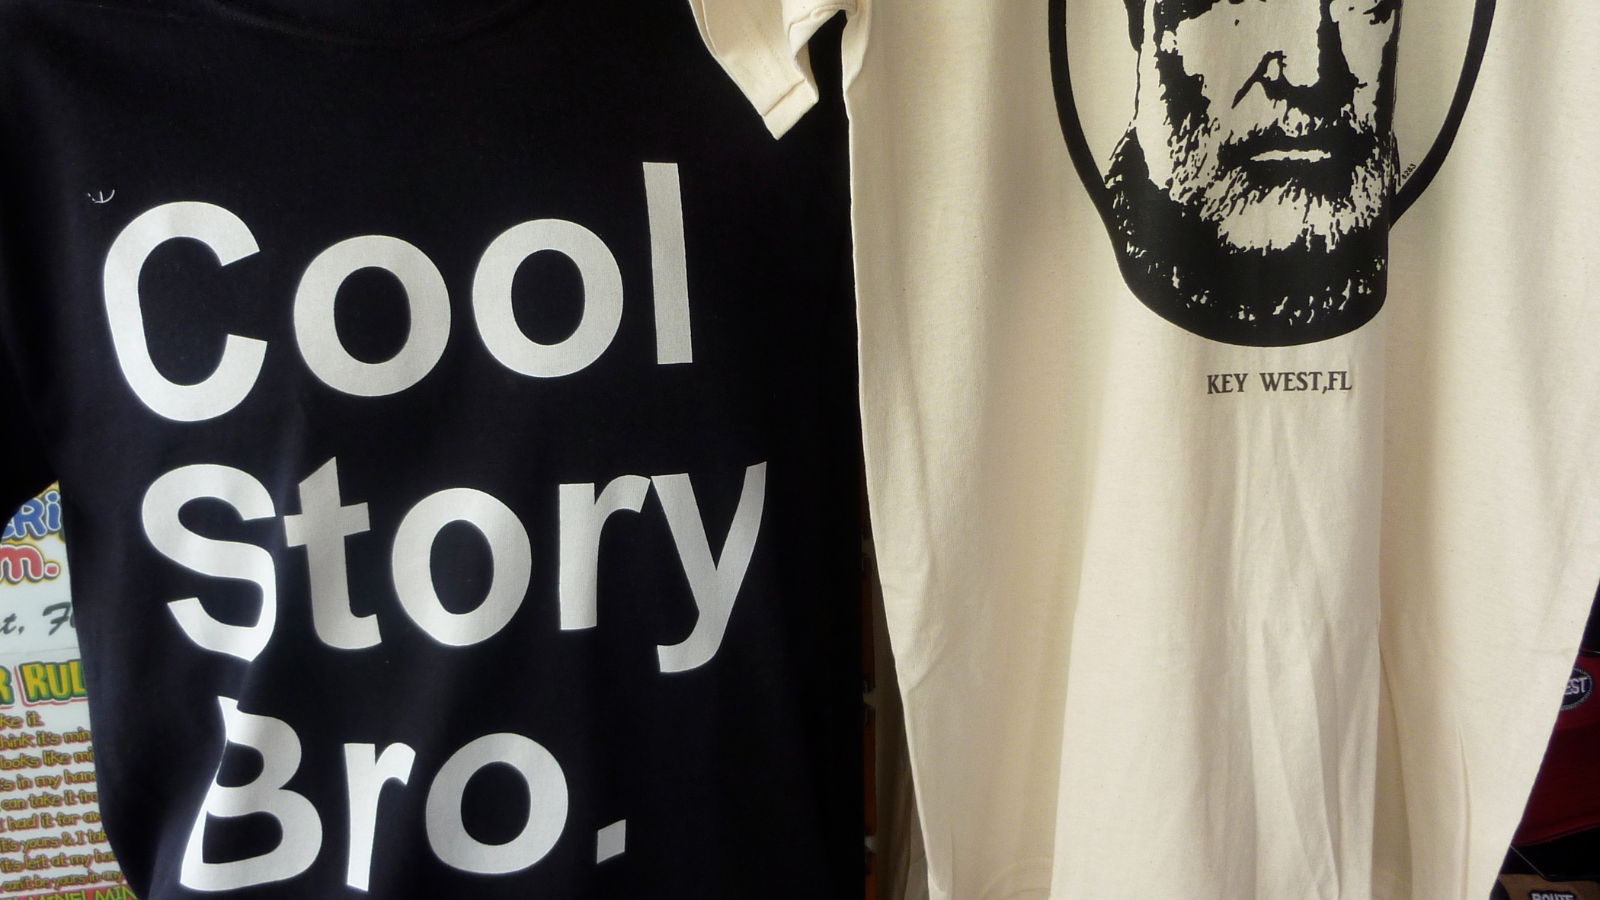 tshirts with hemingway and copy reading cool story bro